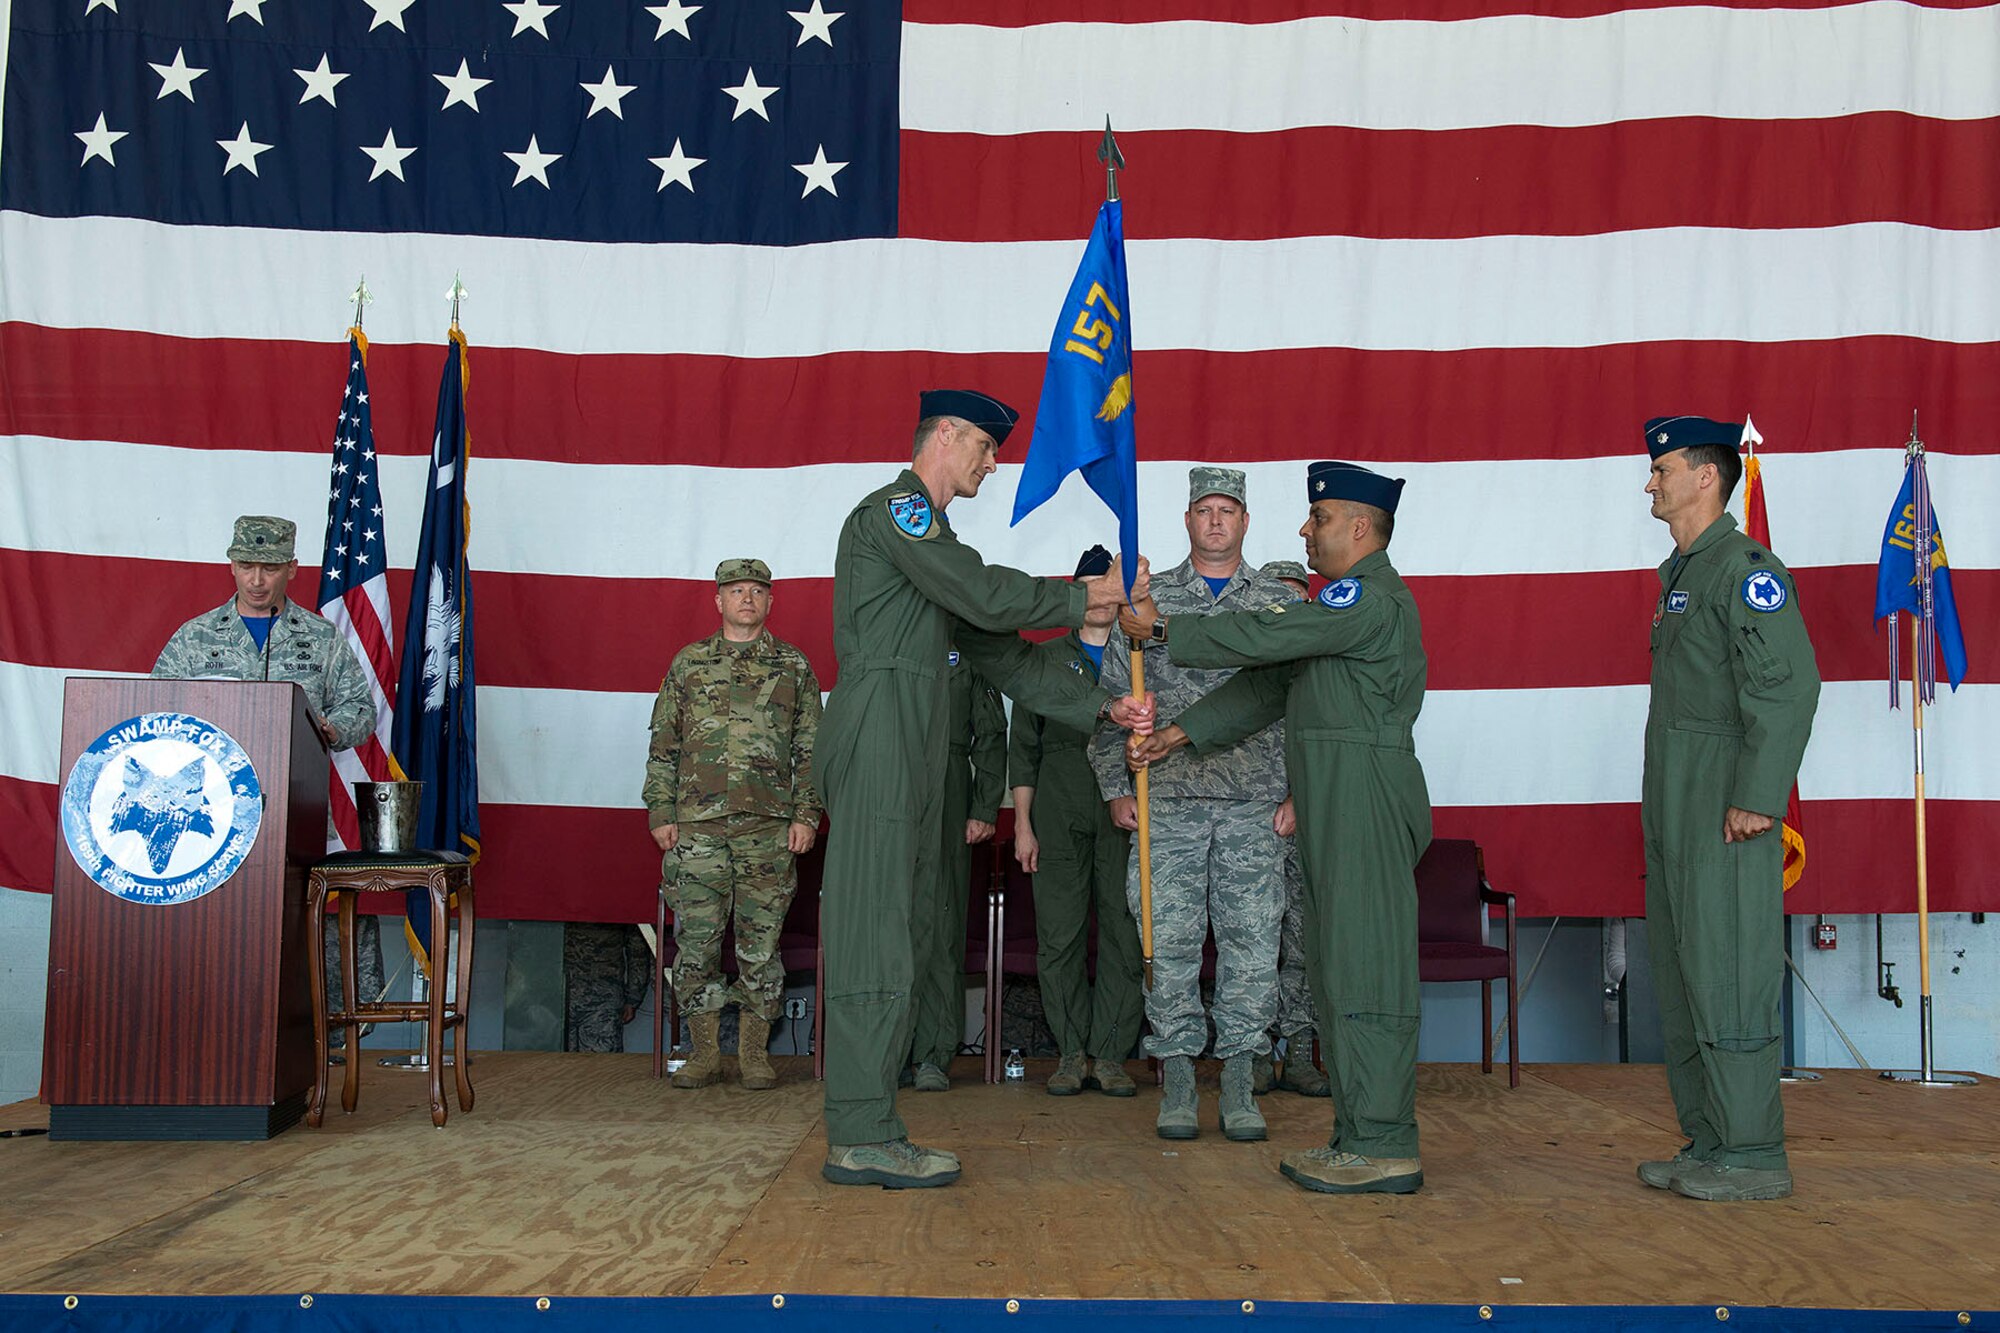 U.S. Airmen of the 169th Fighter Wing and the South Carolina Air National Guard assemble for a change of command ceremony at McEntire Joint National Guard Base, S.C., May 14, 2016. Col. David Meyer relinquishes command of the 169th Fighter Wing to Col. Nicholas Gentile and Lt. Col. Akshai Gandhi assumes the position as vice commander of the 169th Fighter Wing and relinquishes command of the 157th Fighter Squadron to Lt. Col. Brian Tenbrunsel.  (U.S. Air National Guard photo by Tech. Sgt. Jorge Intriago)